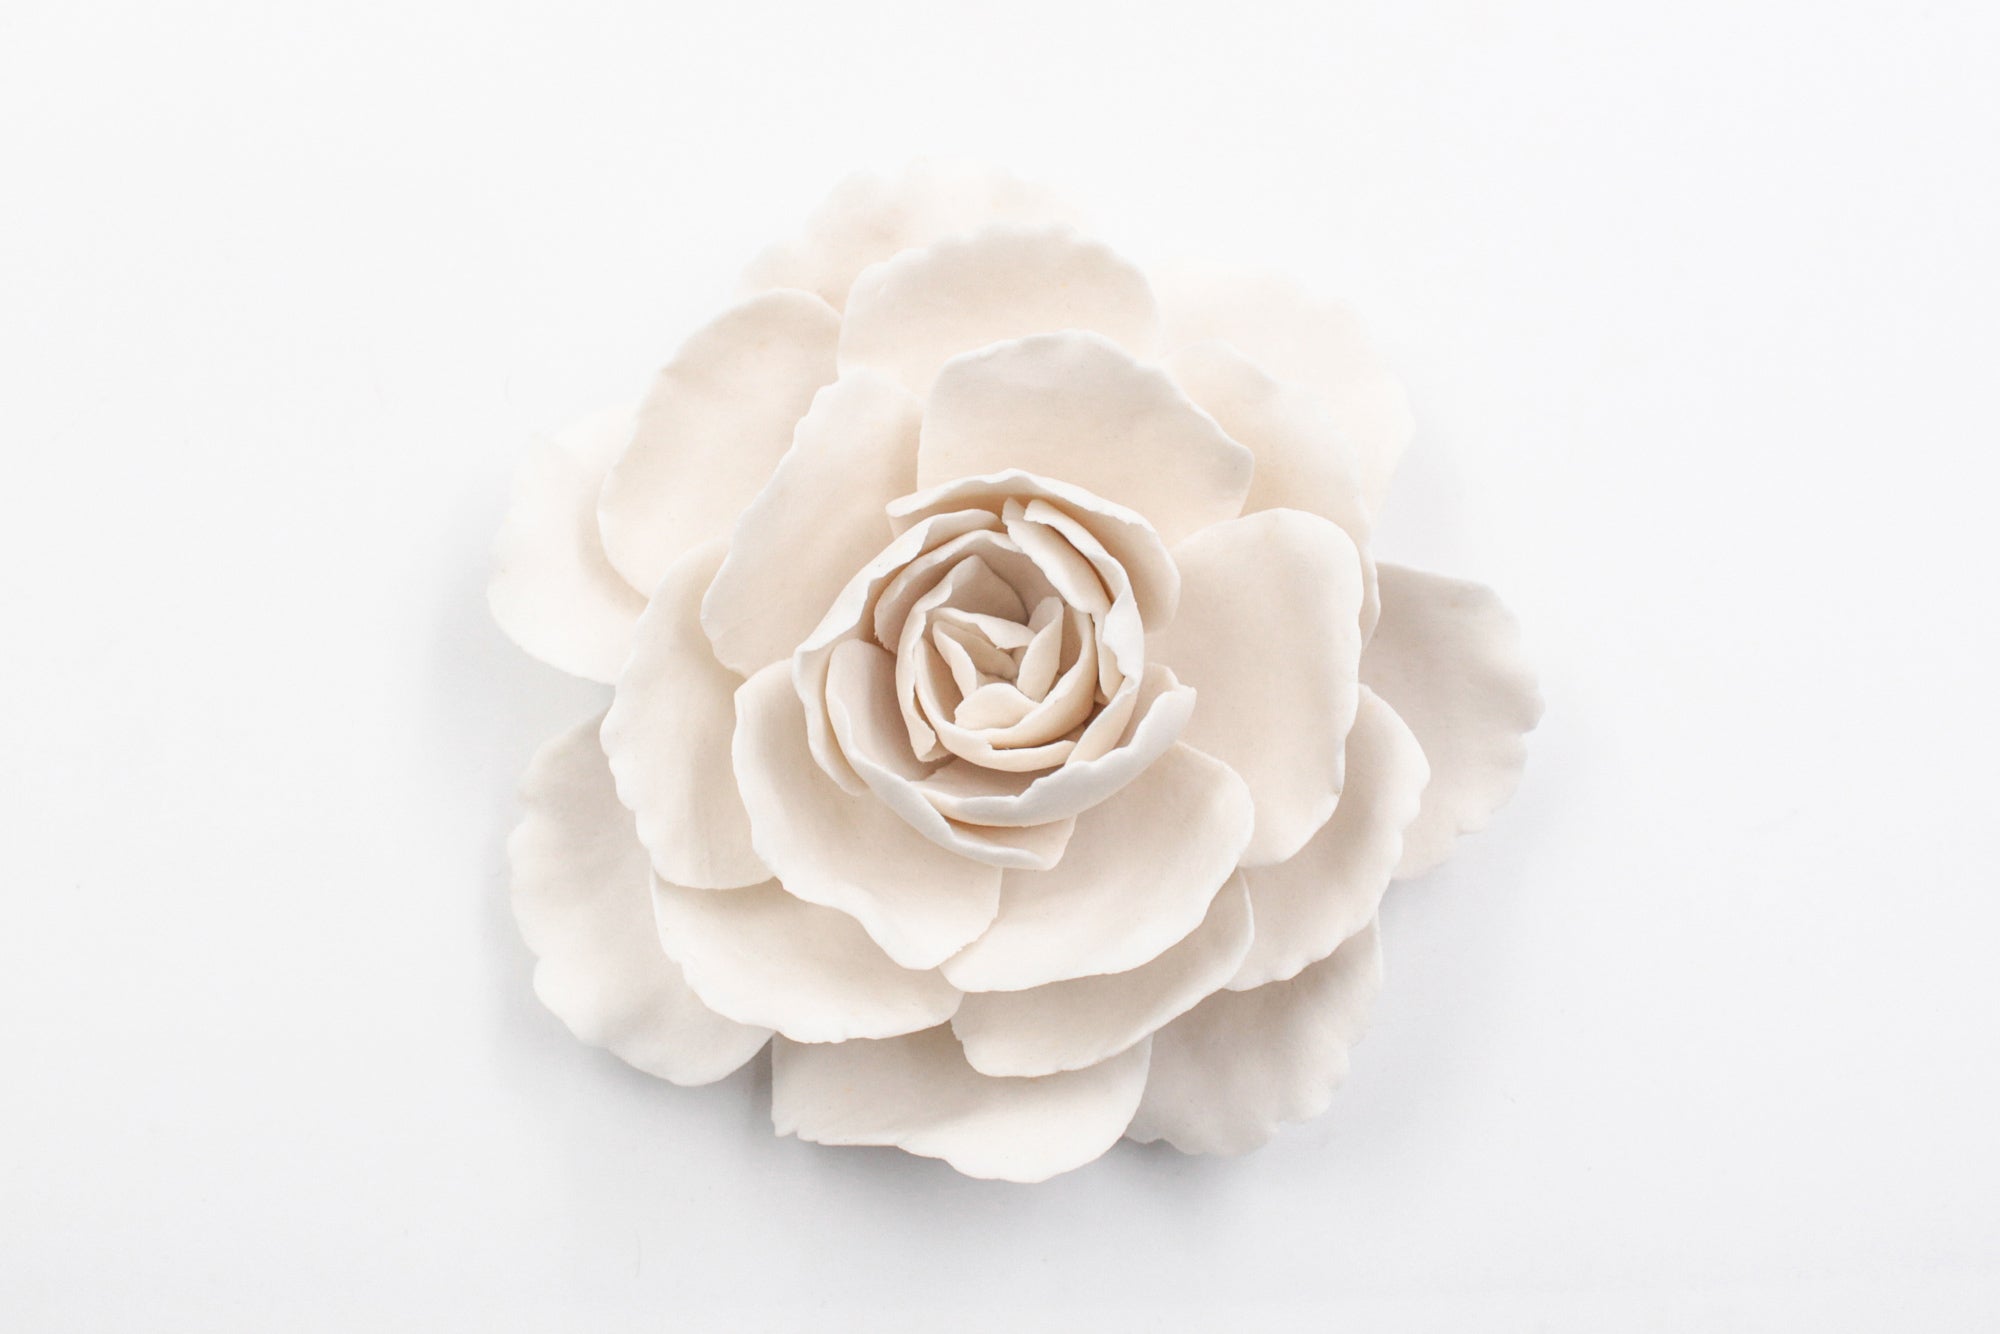 Porcelain Peony- Handmade Porcelain Flower for Interior and Event Decoration - Made in France by Alain Granell – Home and Wall Decoration